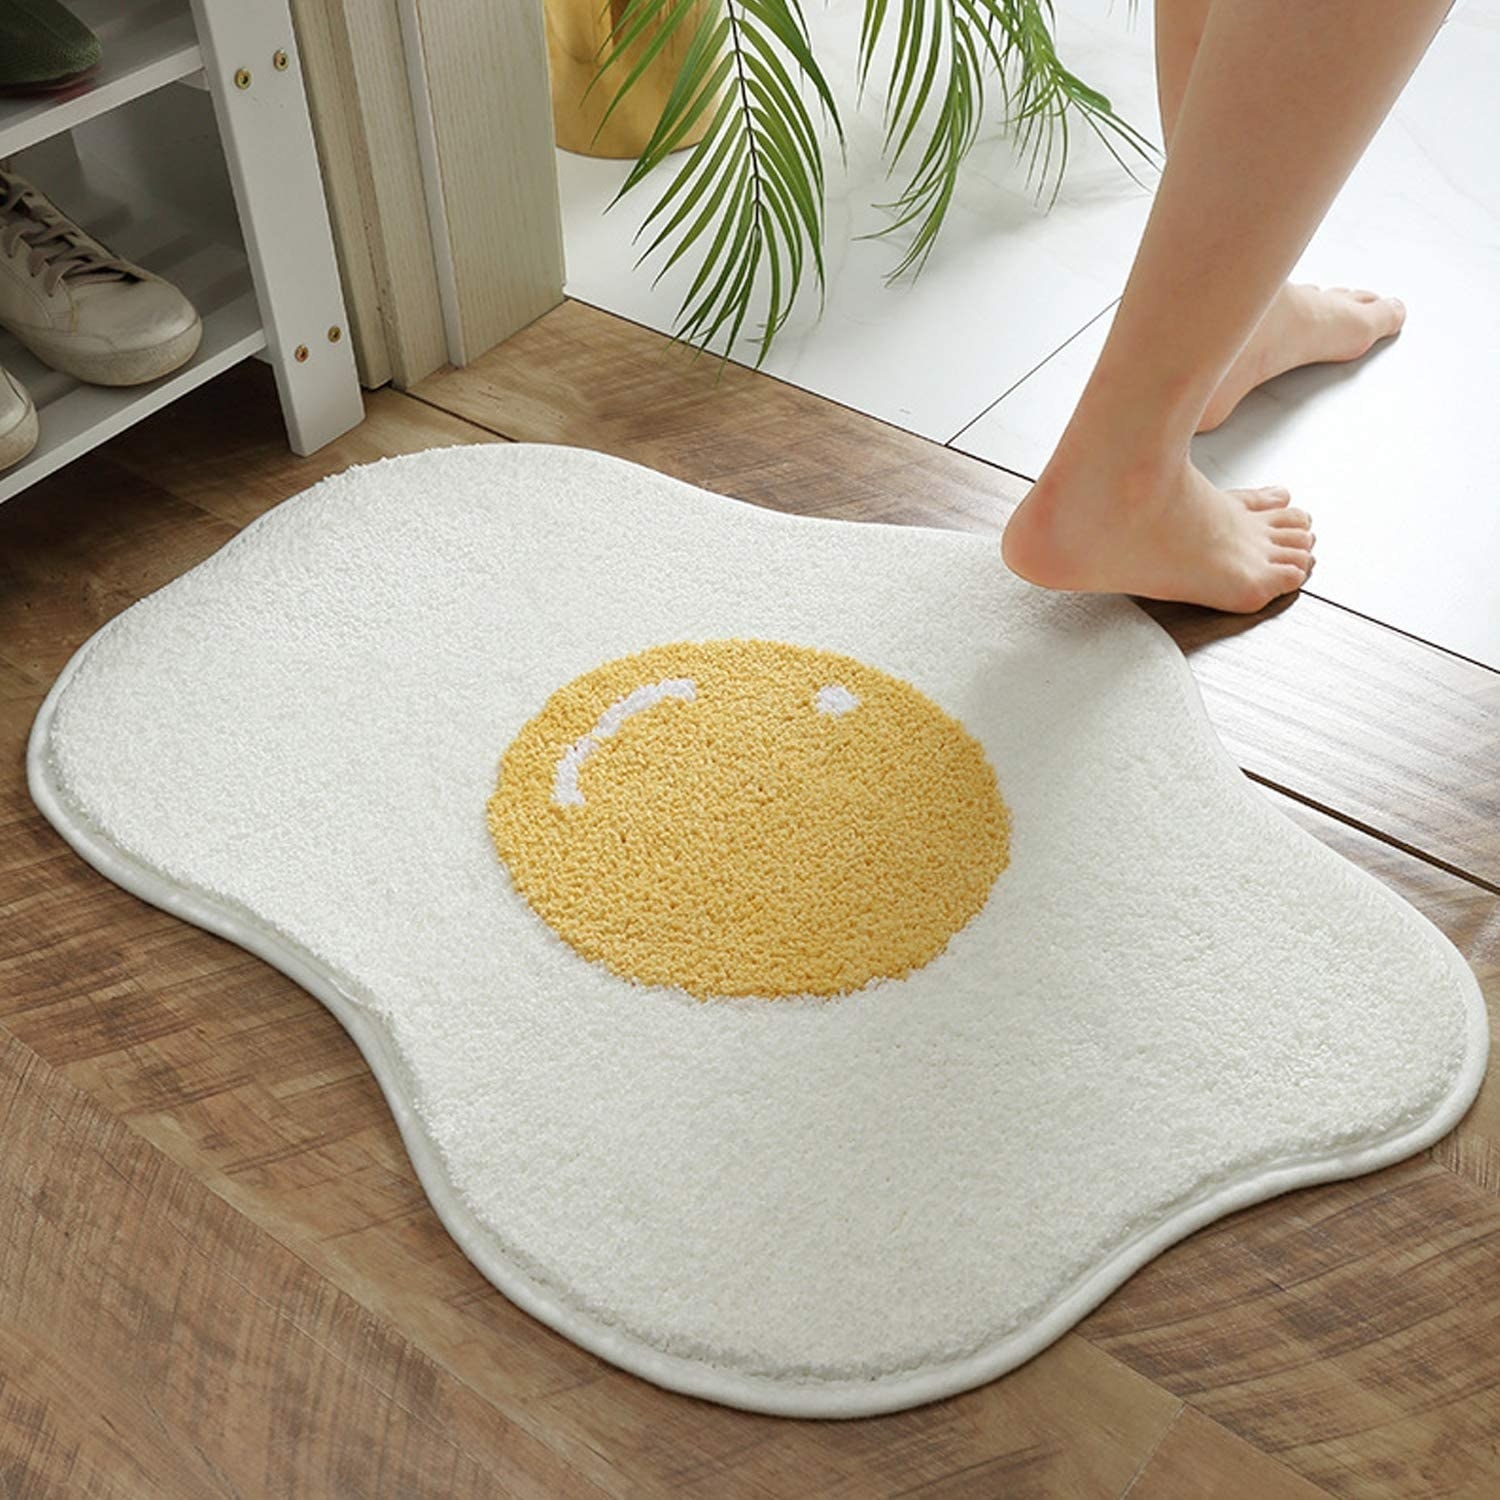 the white and yellow egg-shaped mat